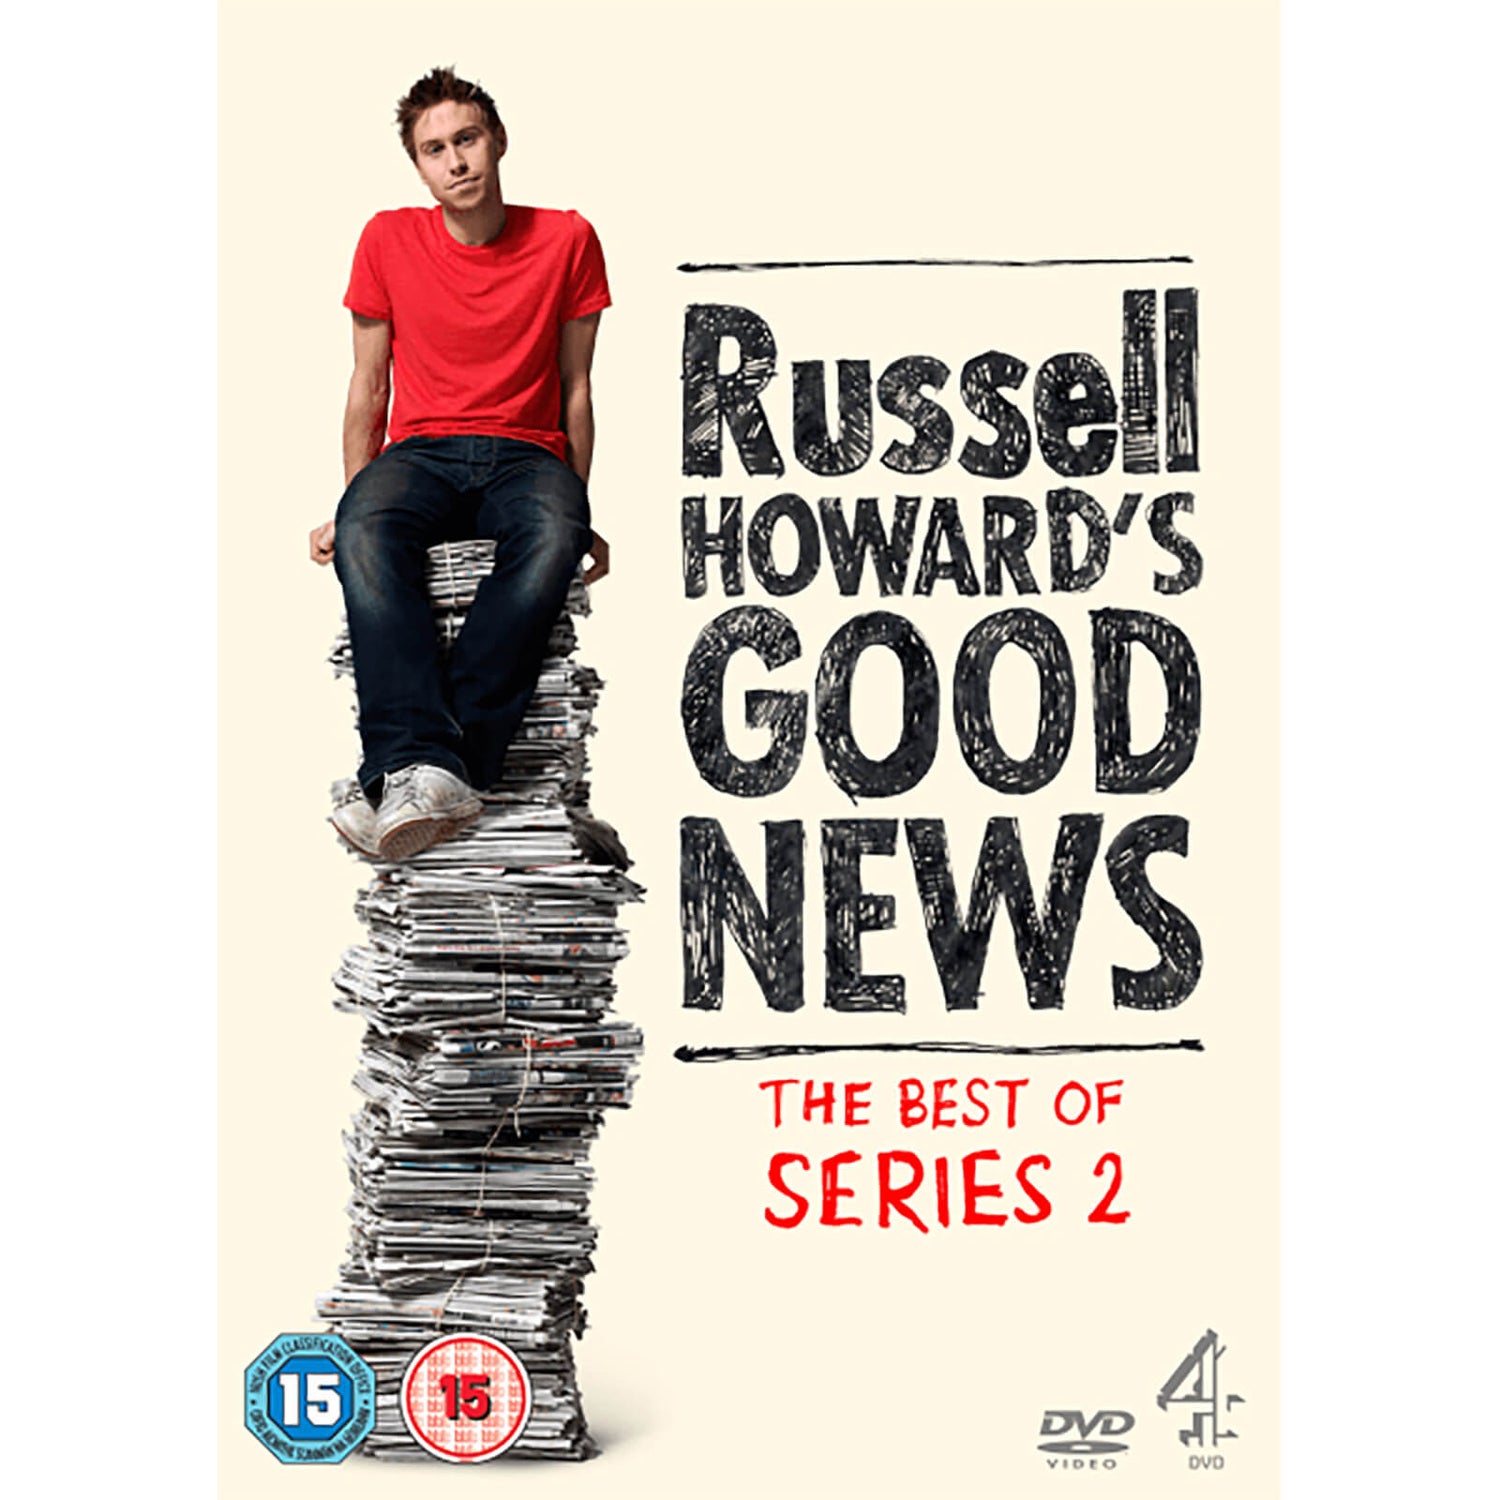 Russell Howards Good News - Best of Series 2